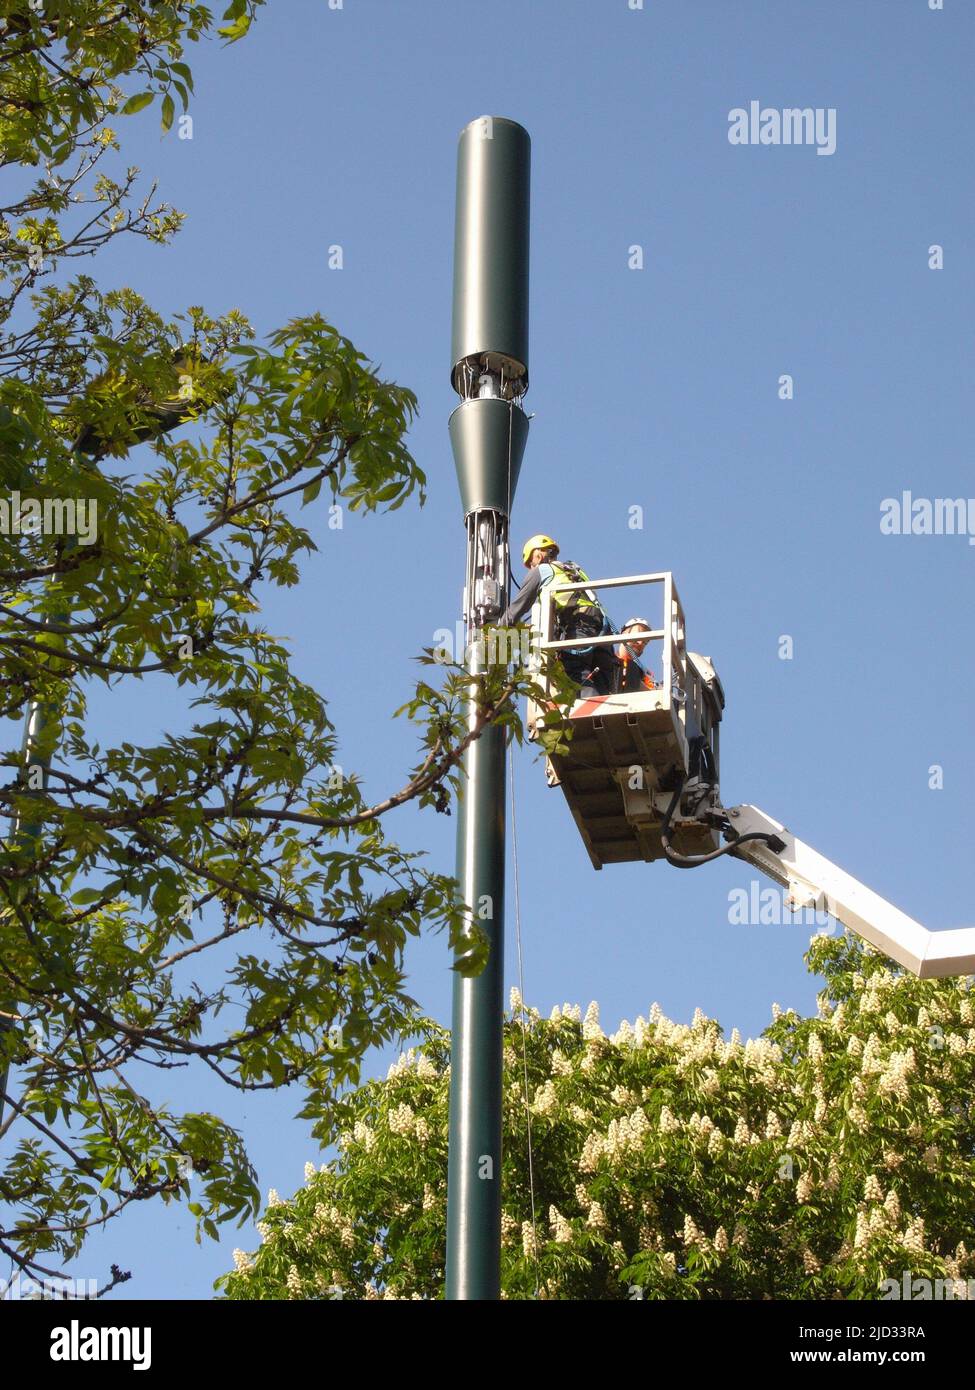 Workman using cherry picker while fitting a 5g Telecoms Mast London Stock Photo